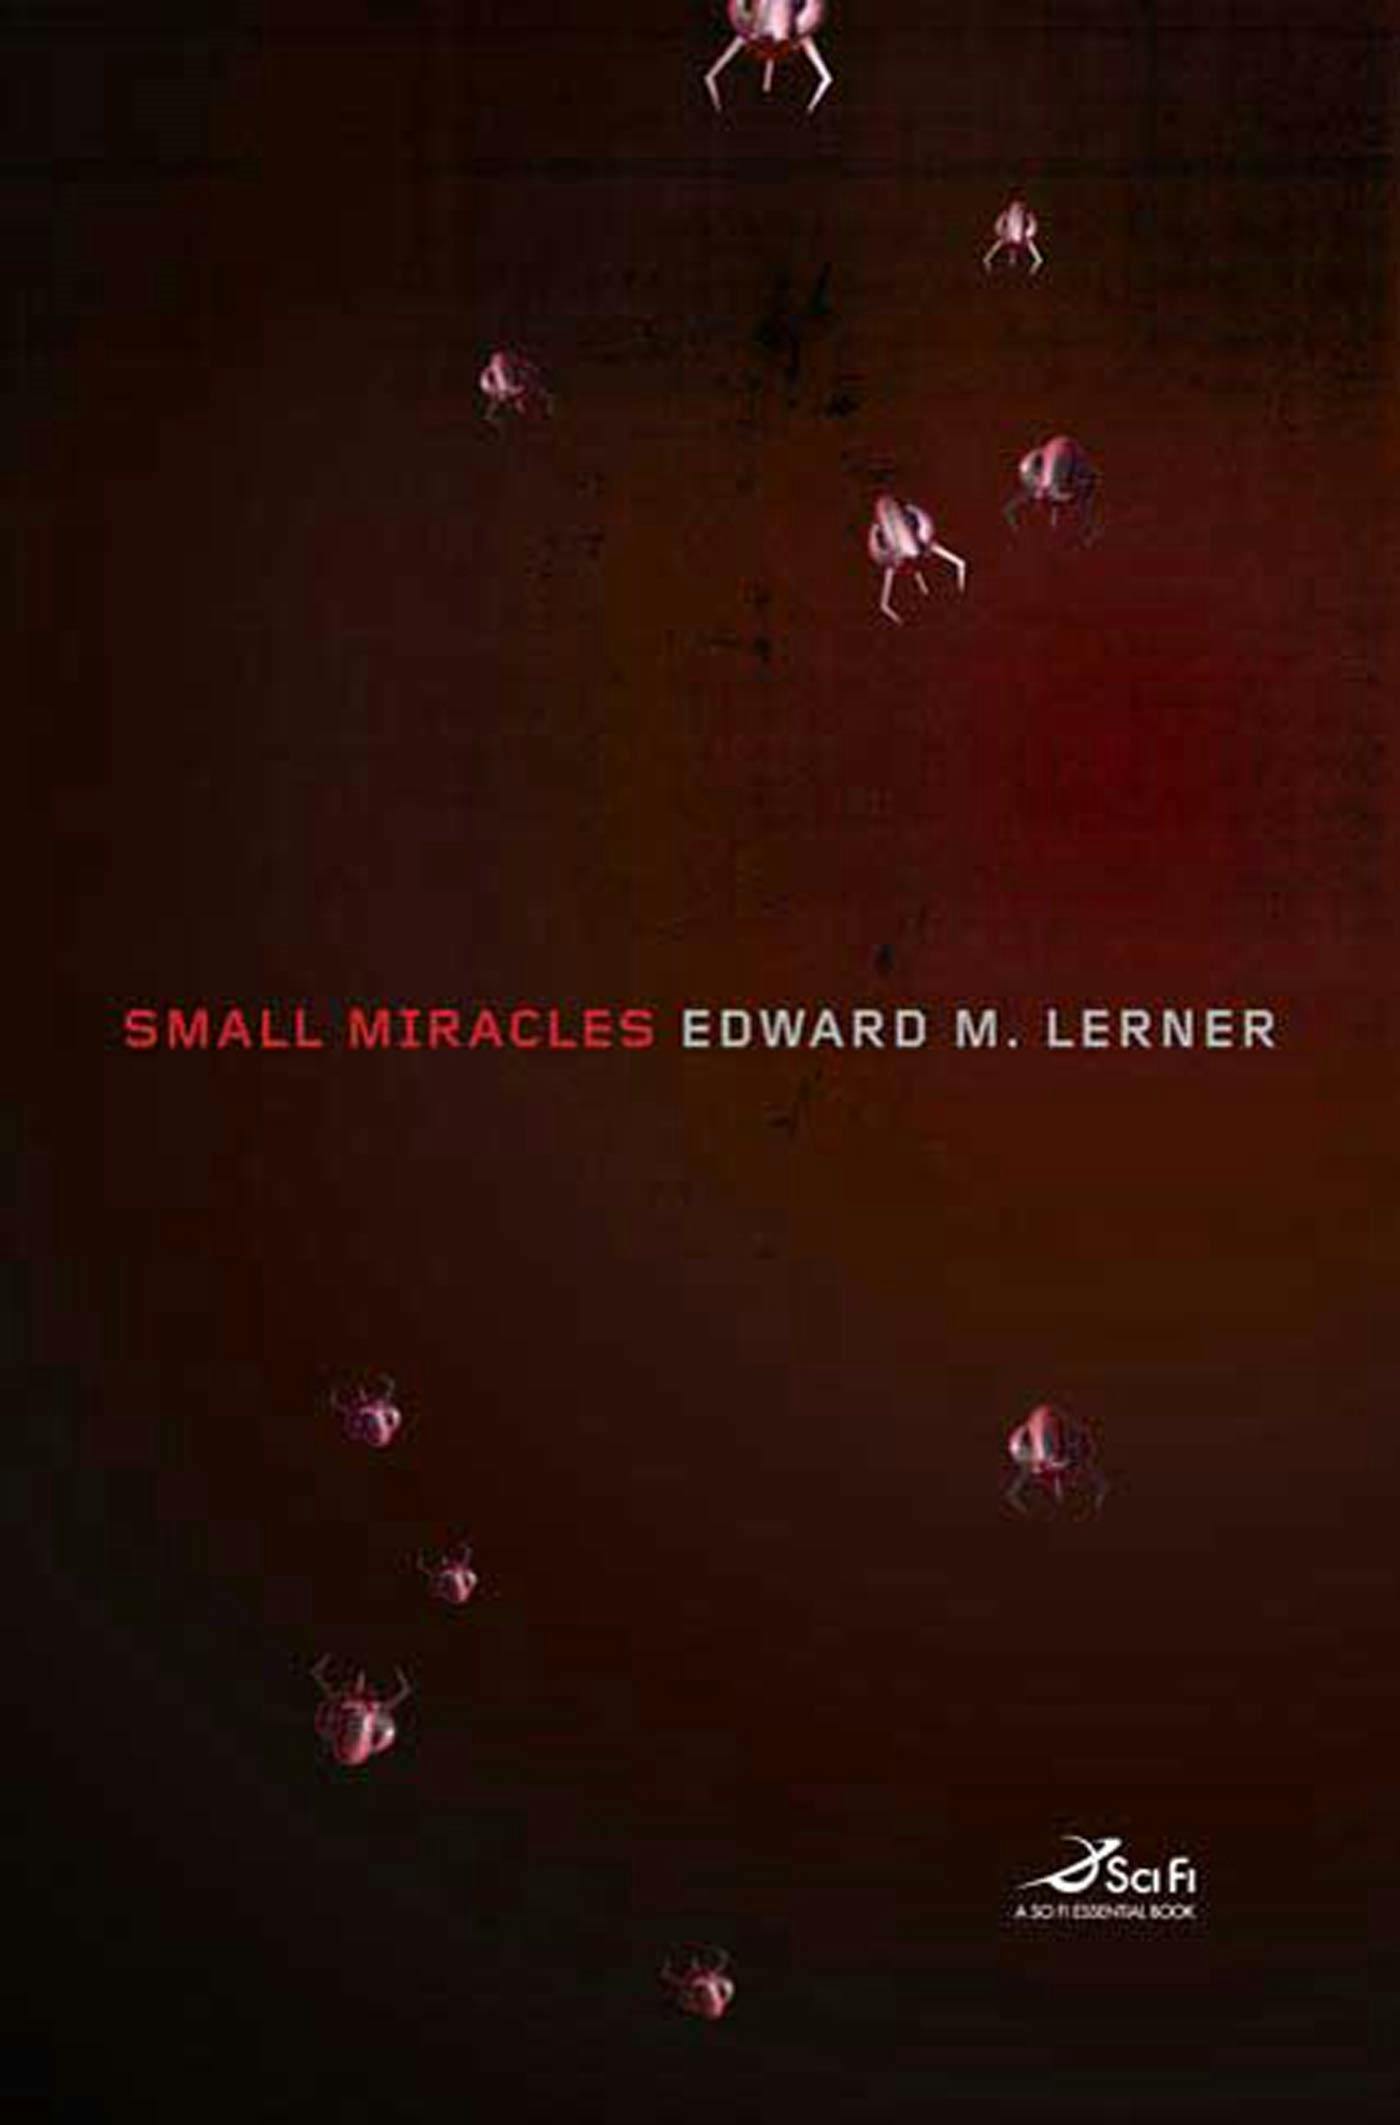 Cover for the book titled as: Small Miracles